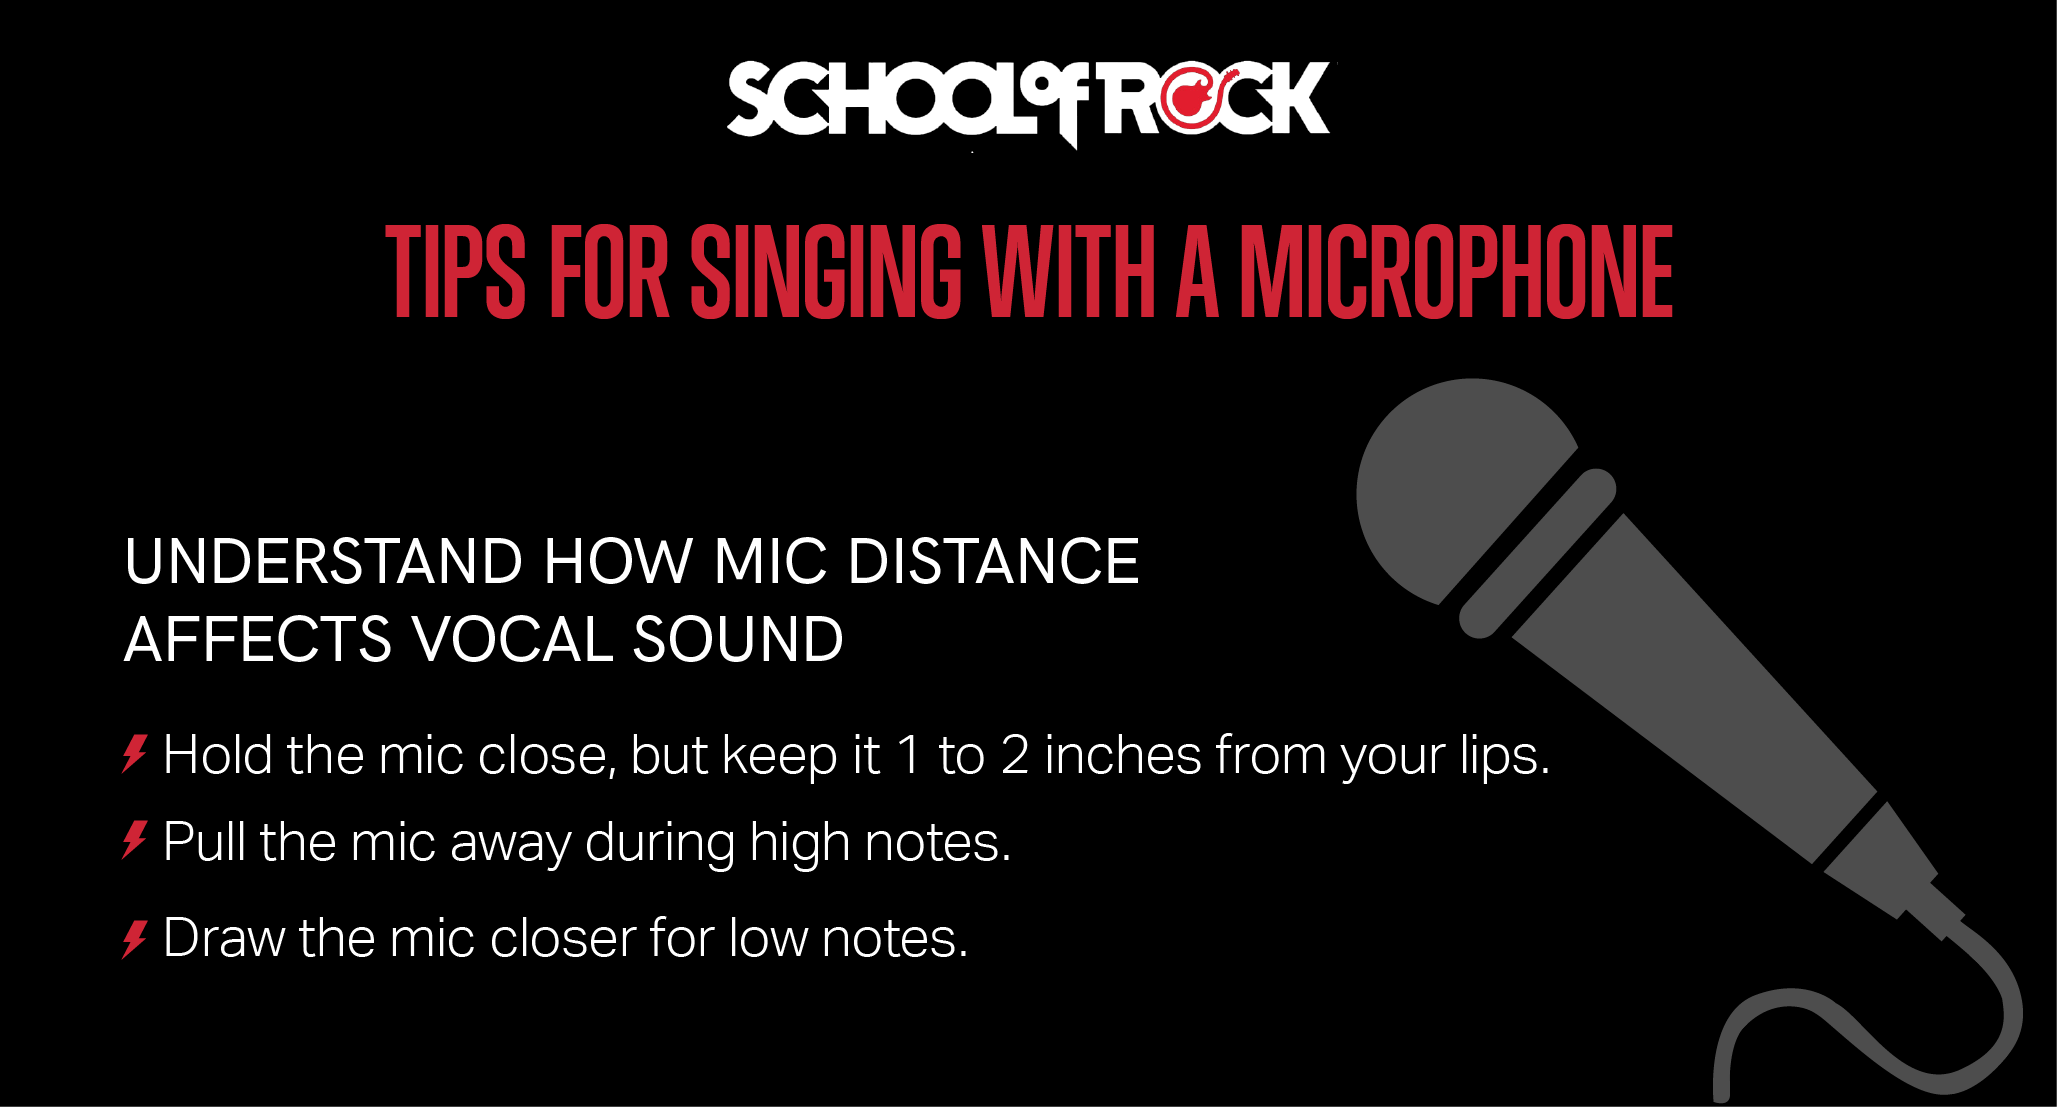 How microphone distance affects vocal sound